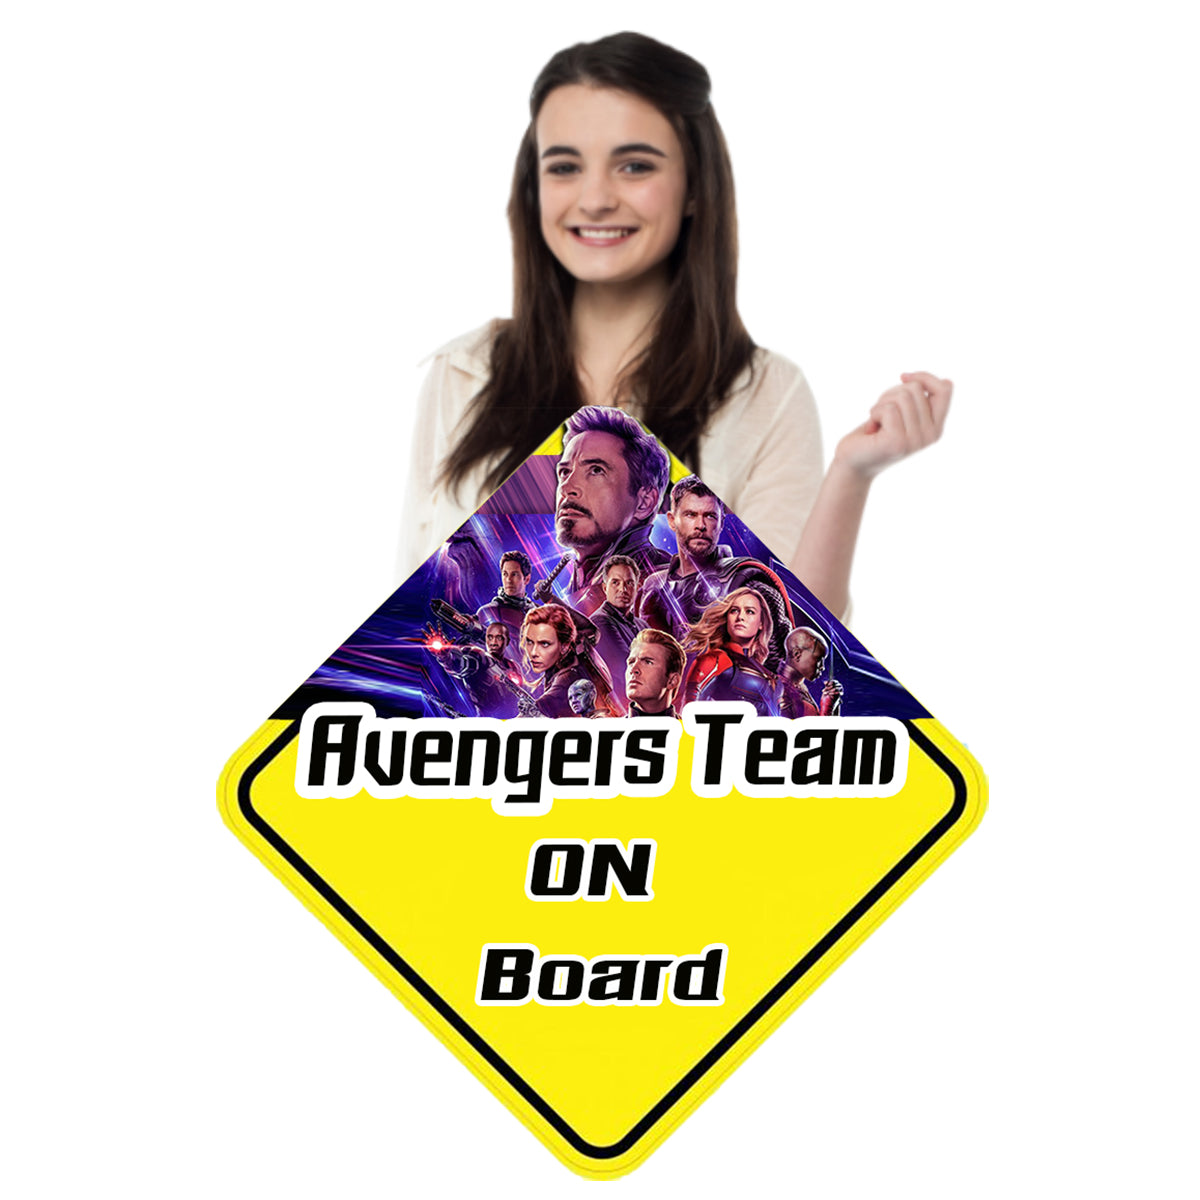 Personalised Avengers Team On Board (B) Safety Sticker Car Vinyl Stickers Decals Accessories